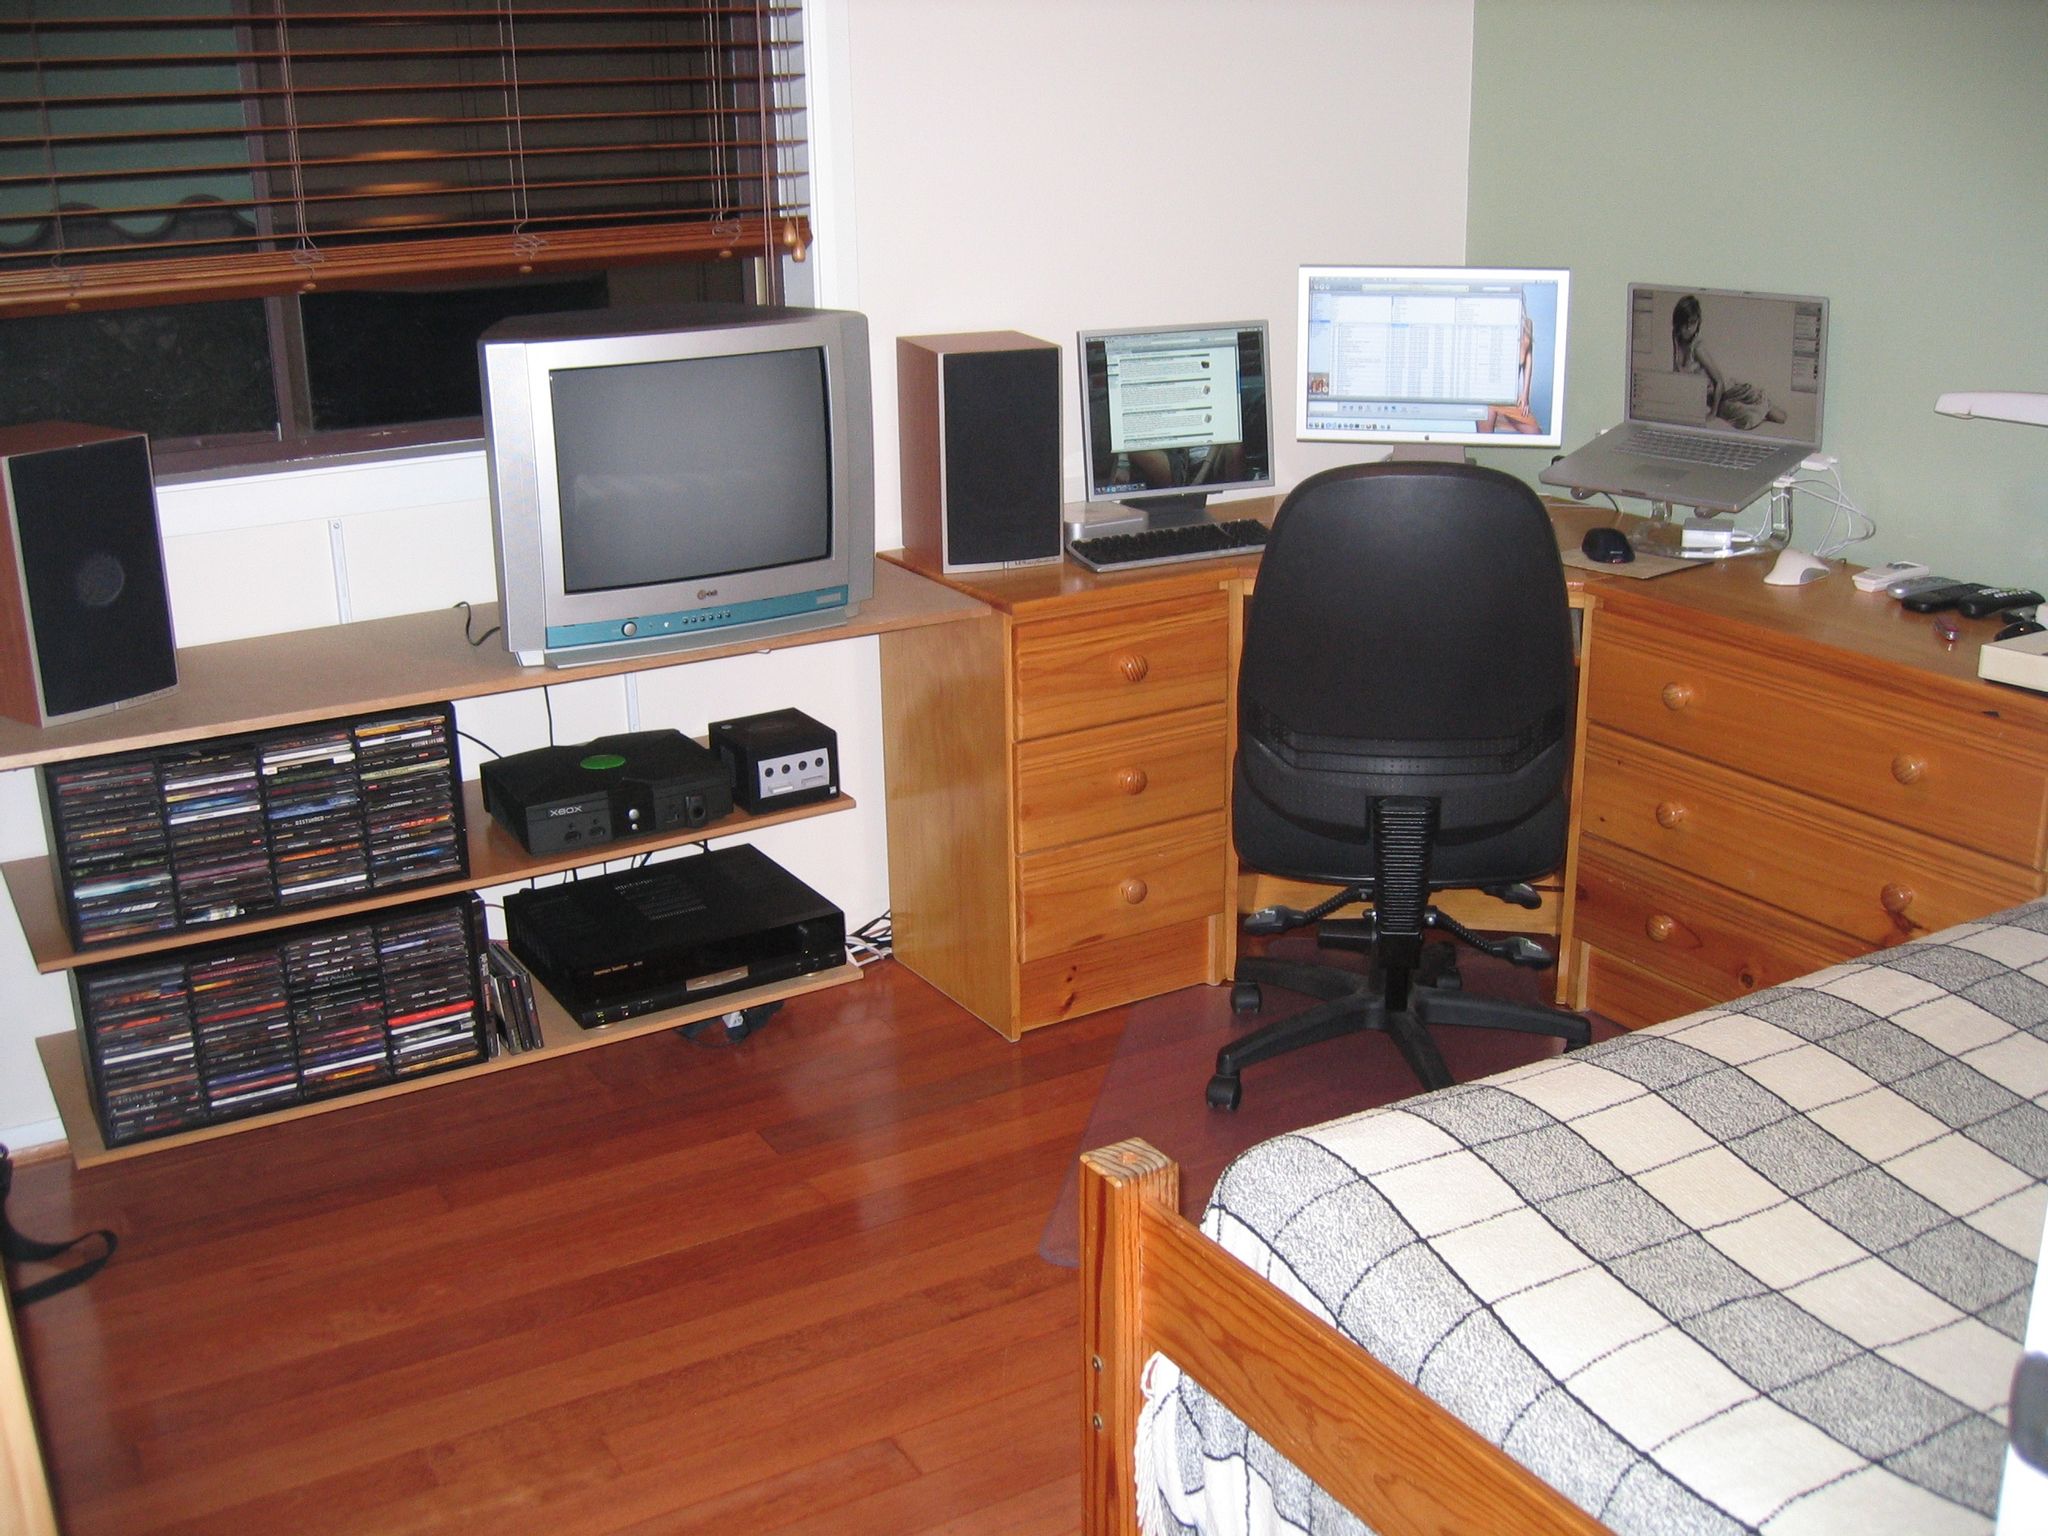 A photo of my room. The floor is reddish wood, there's a corner desk towards the right with a 20" Apple Cinema Display in the middle, a 17" PowerBook G4 to the right, and a 17" 4:3 monitor the left. To the left of the desk are three wall-mounted shelves with a CRT TV on the top, an Xbox and GameCube plus a rack of CDs in the middle, and another rack of CDs on the bottom alongside a stereo amplifier.